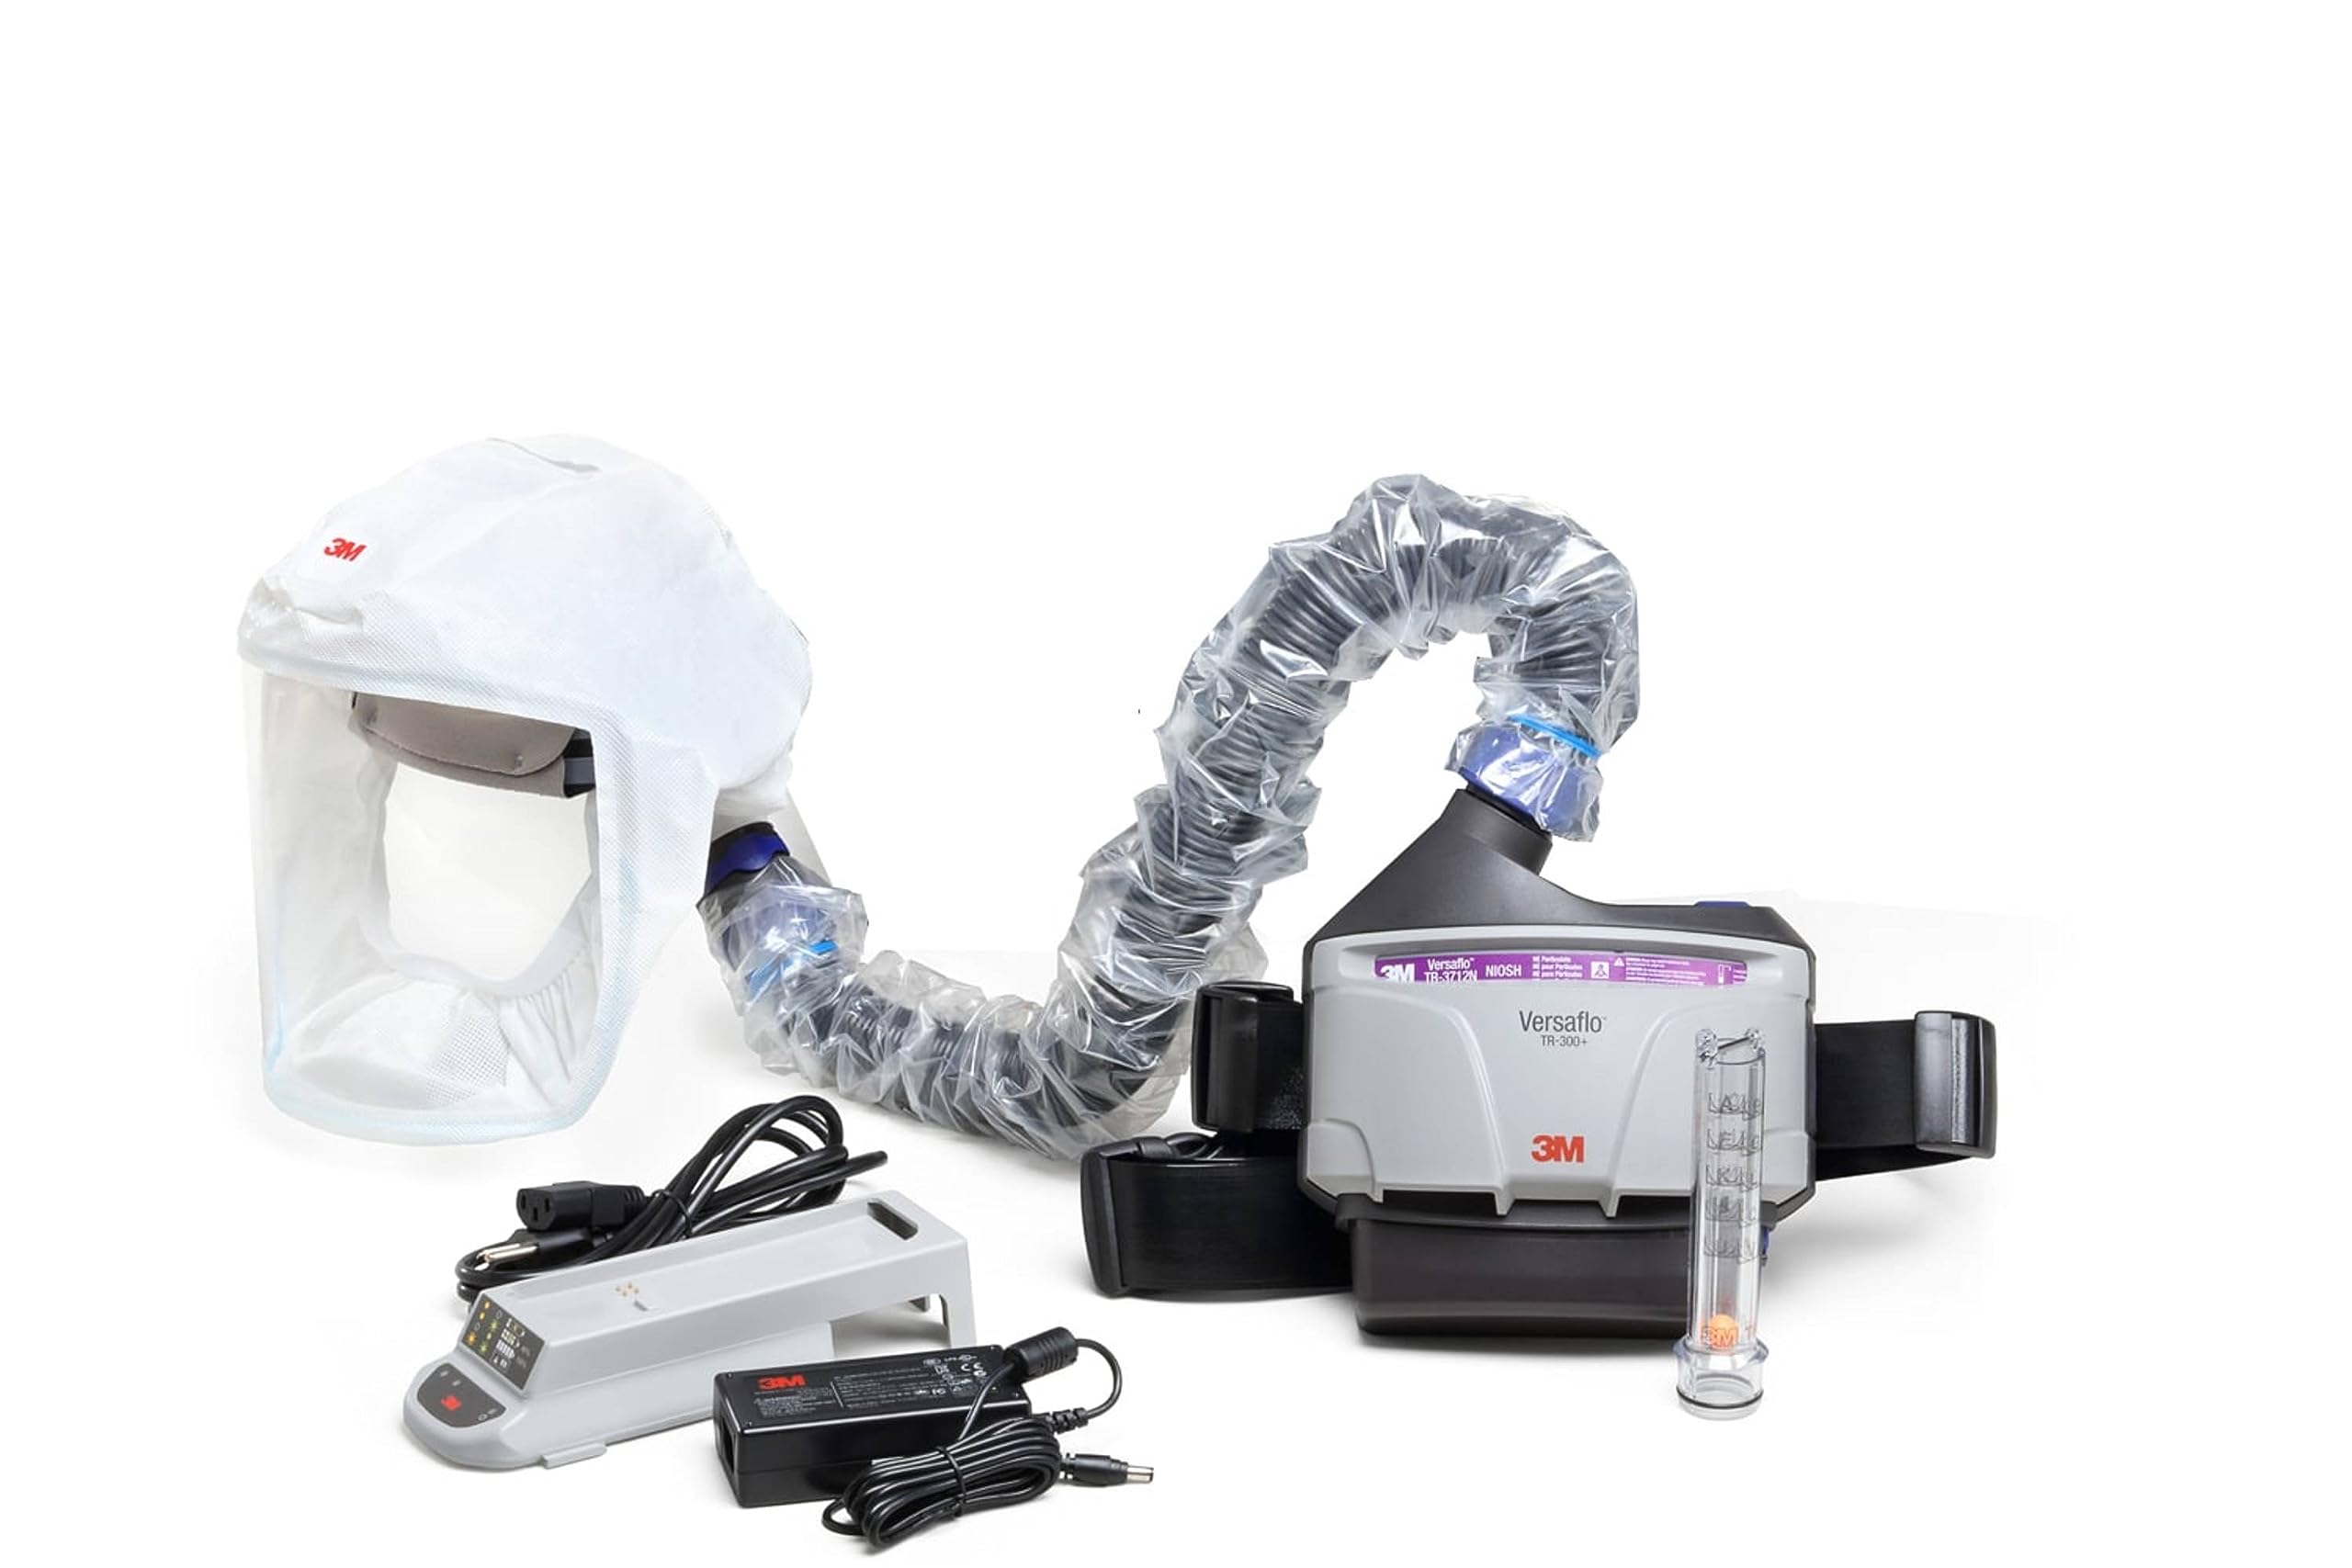 3M PAPR Respirator, Versaflo Powered Air Purifying Respirator Kit, TR-300N+ HKL, Healthcare, M/L Headcover, Lightweight, Low-Profile, Easy to Use, All-in-One Respiratory Protection for Particulates